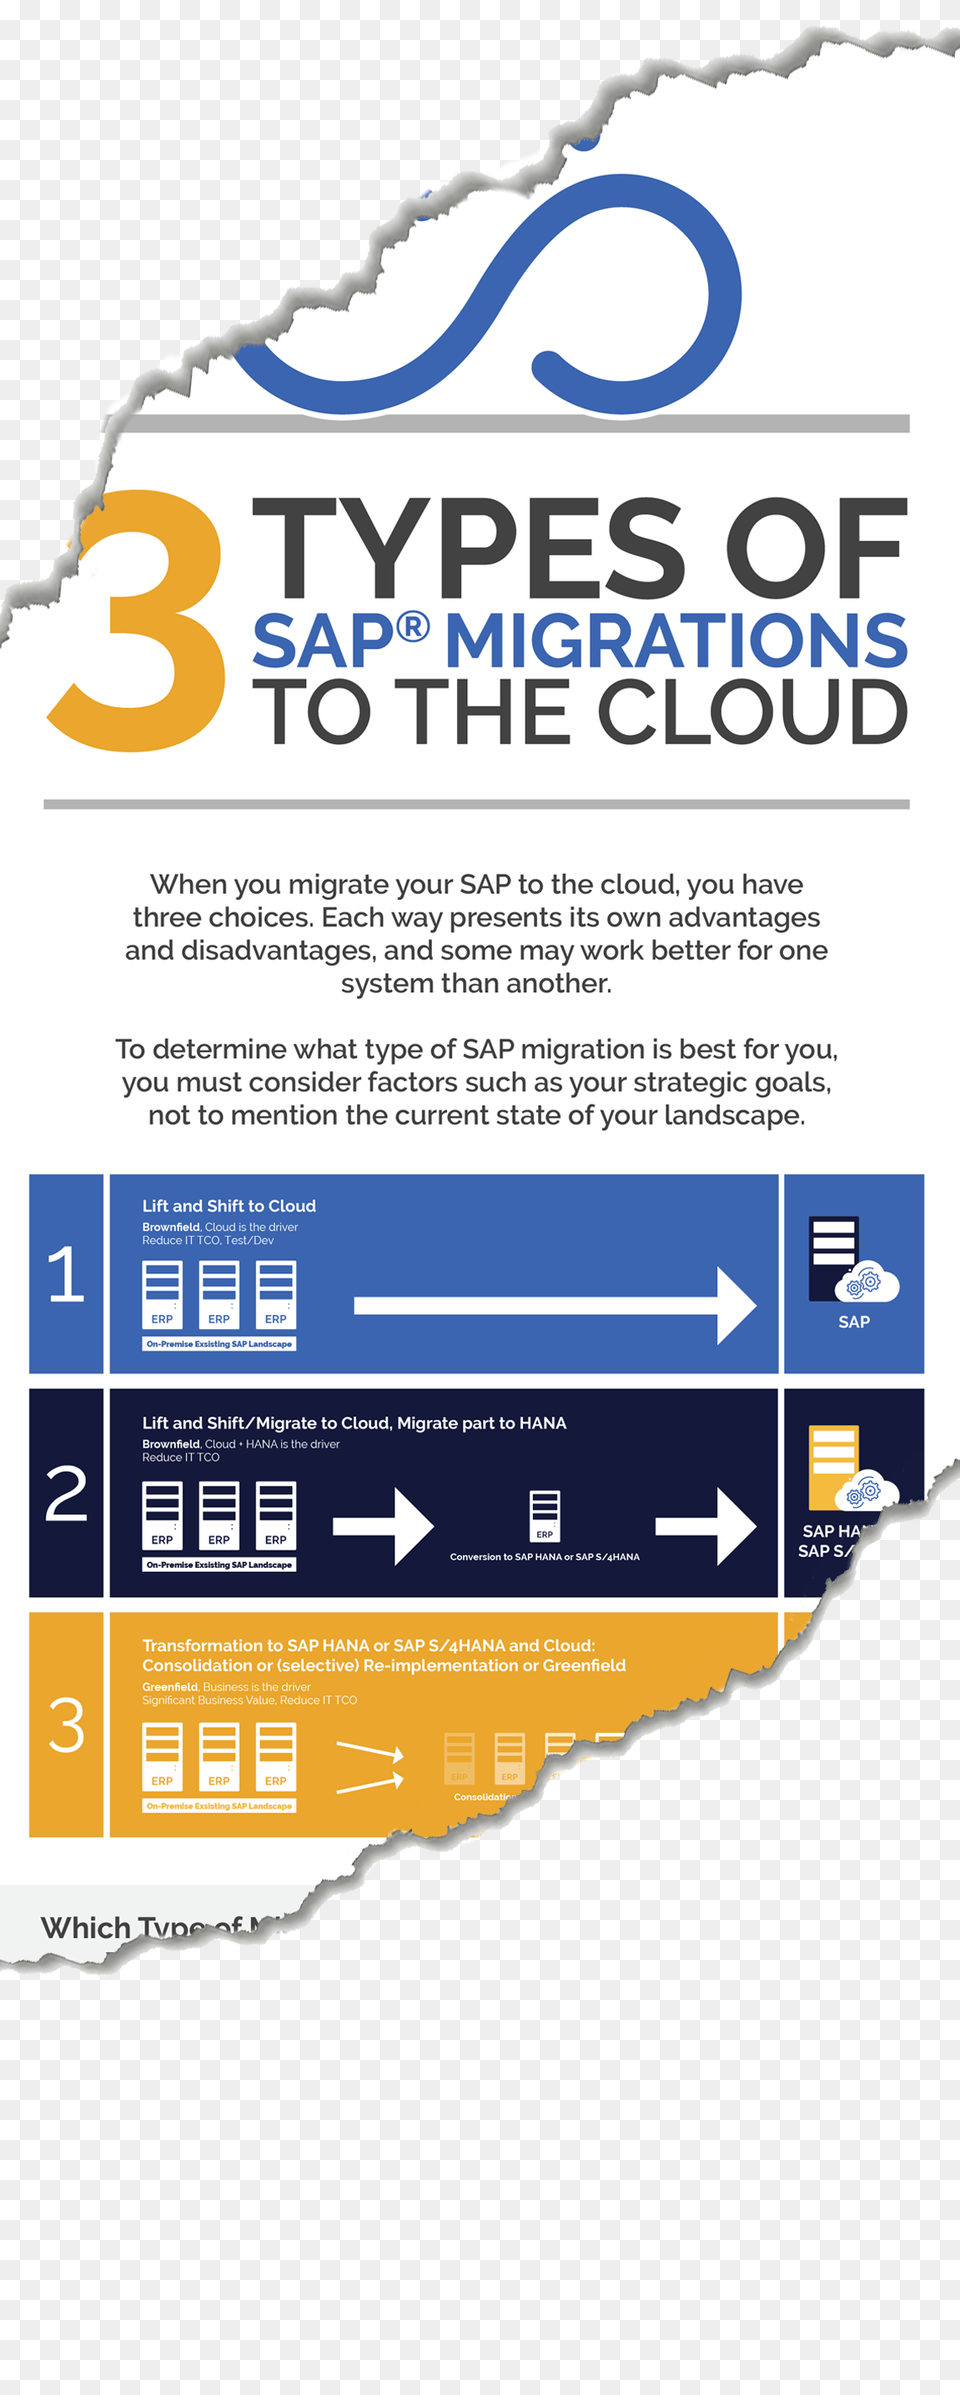 Infographic Form 3 Types Of Sap Migrations To The Cloud Poster, Advertisement Png Image